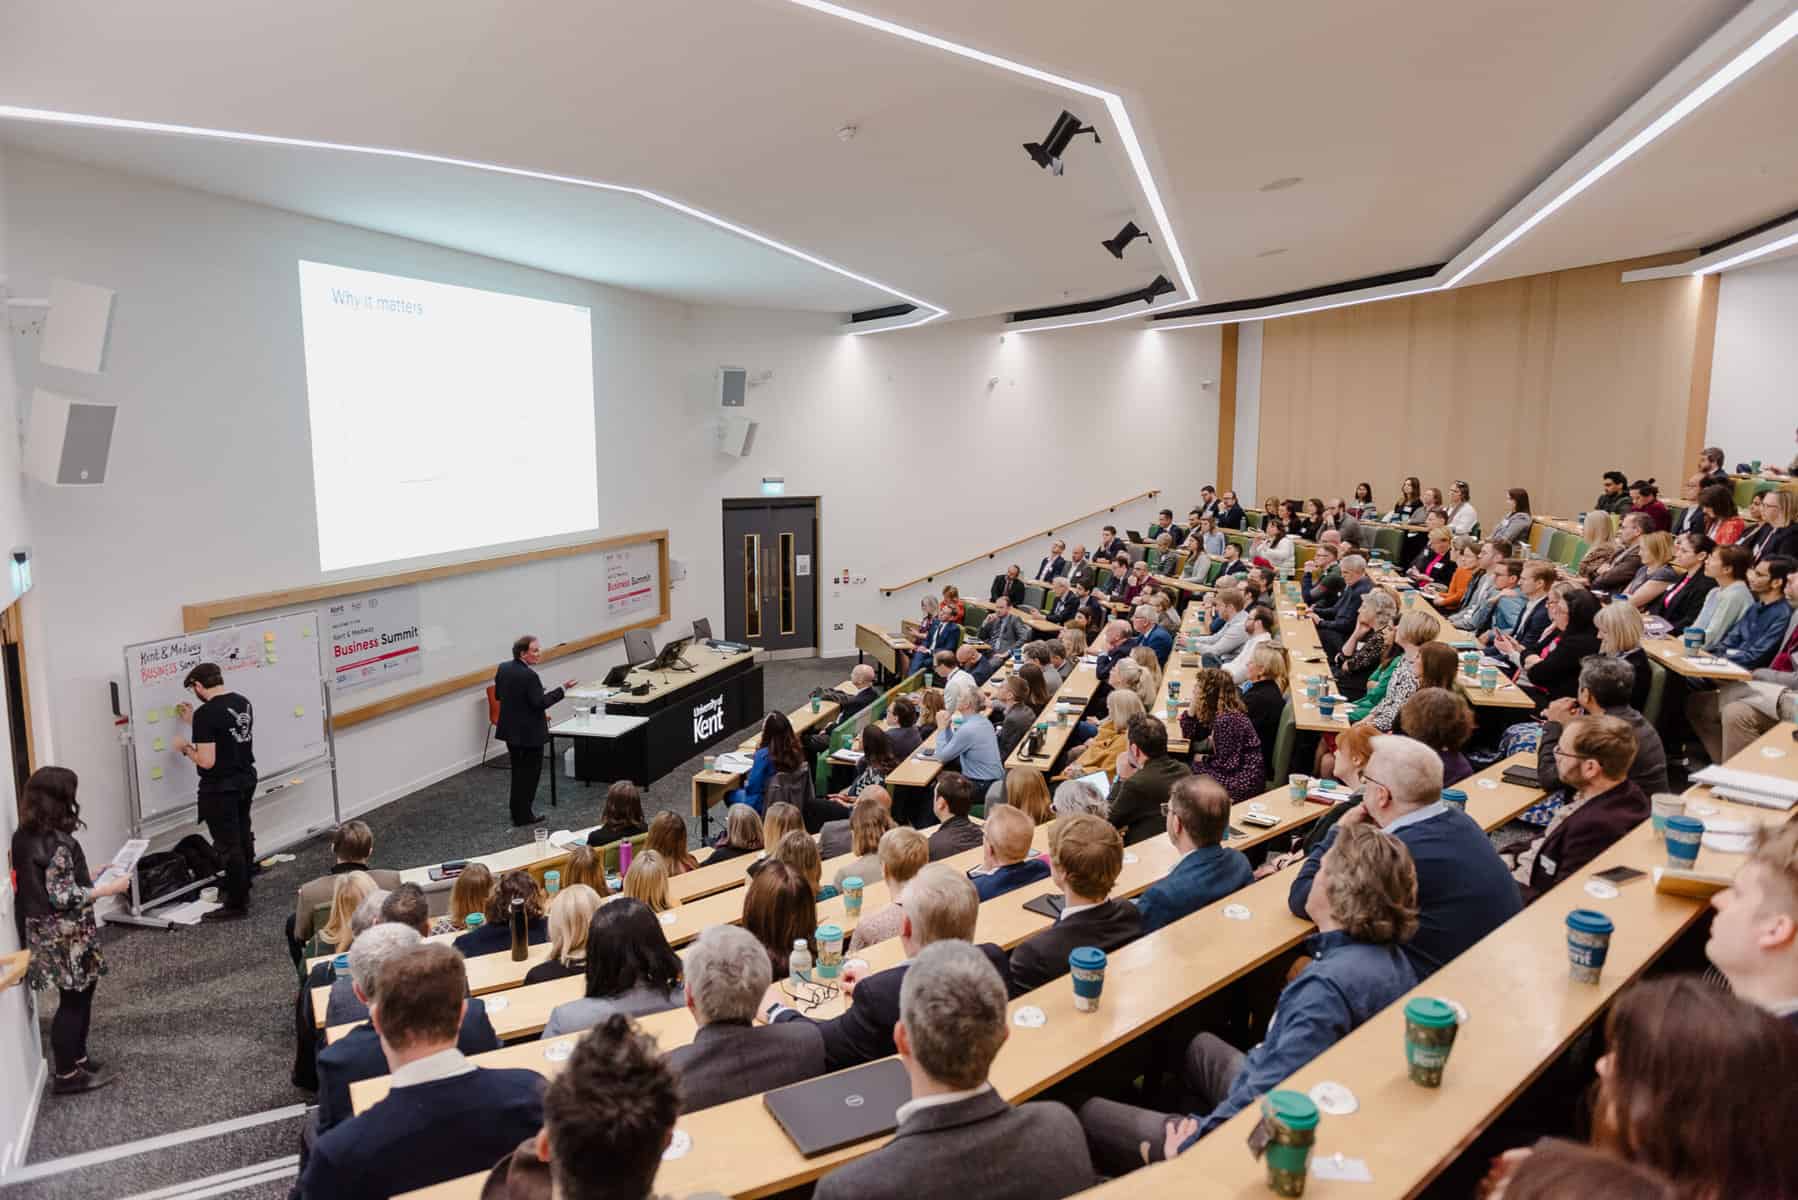 Connect, Collaborate and Learn at University of Kent.